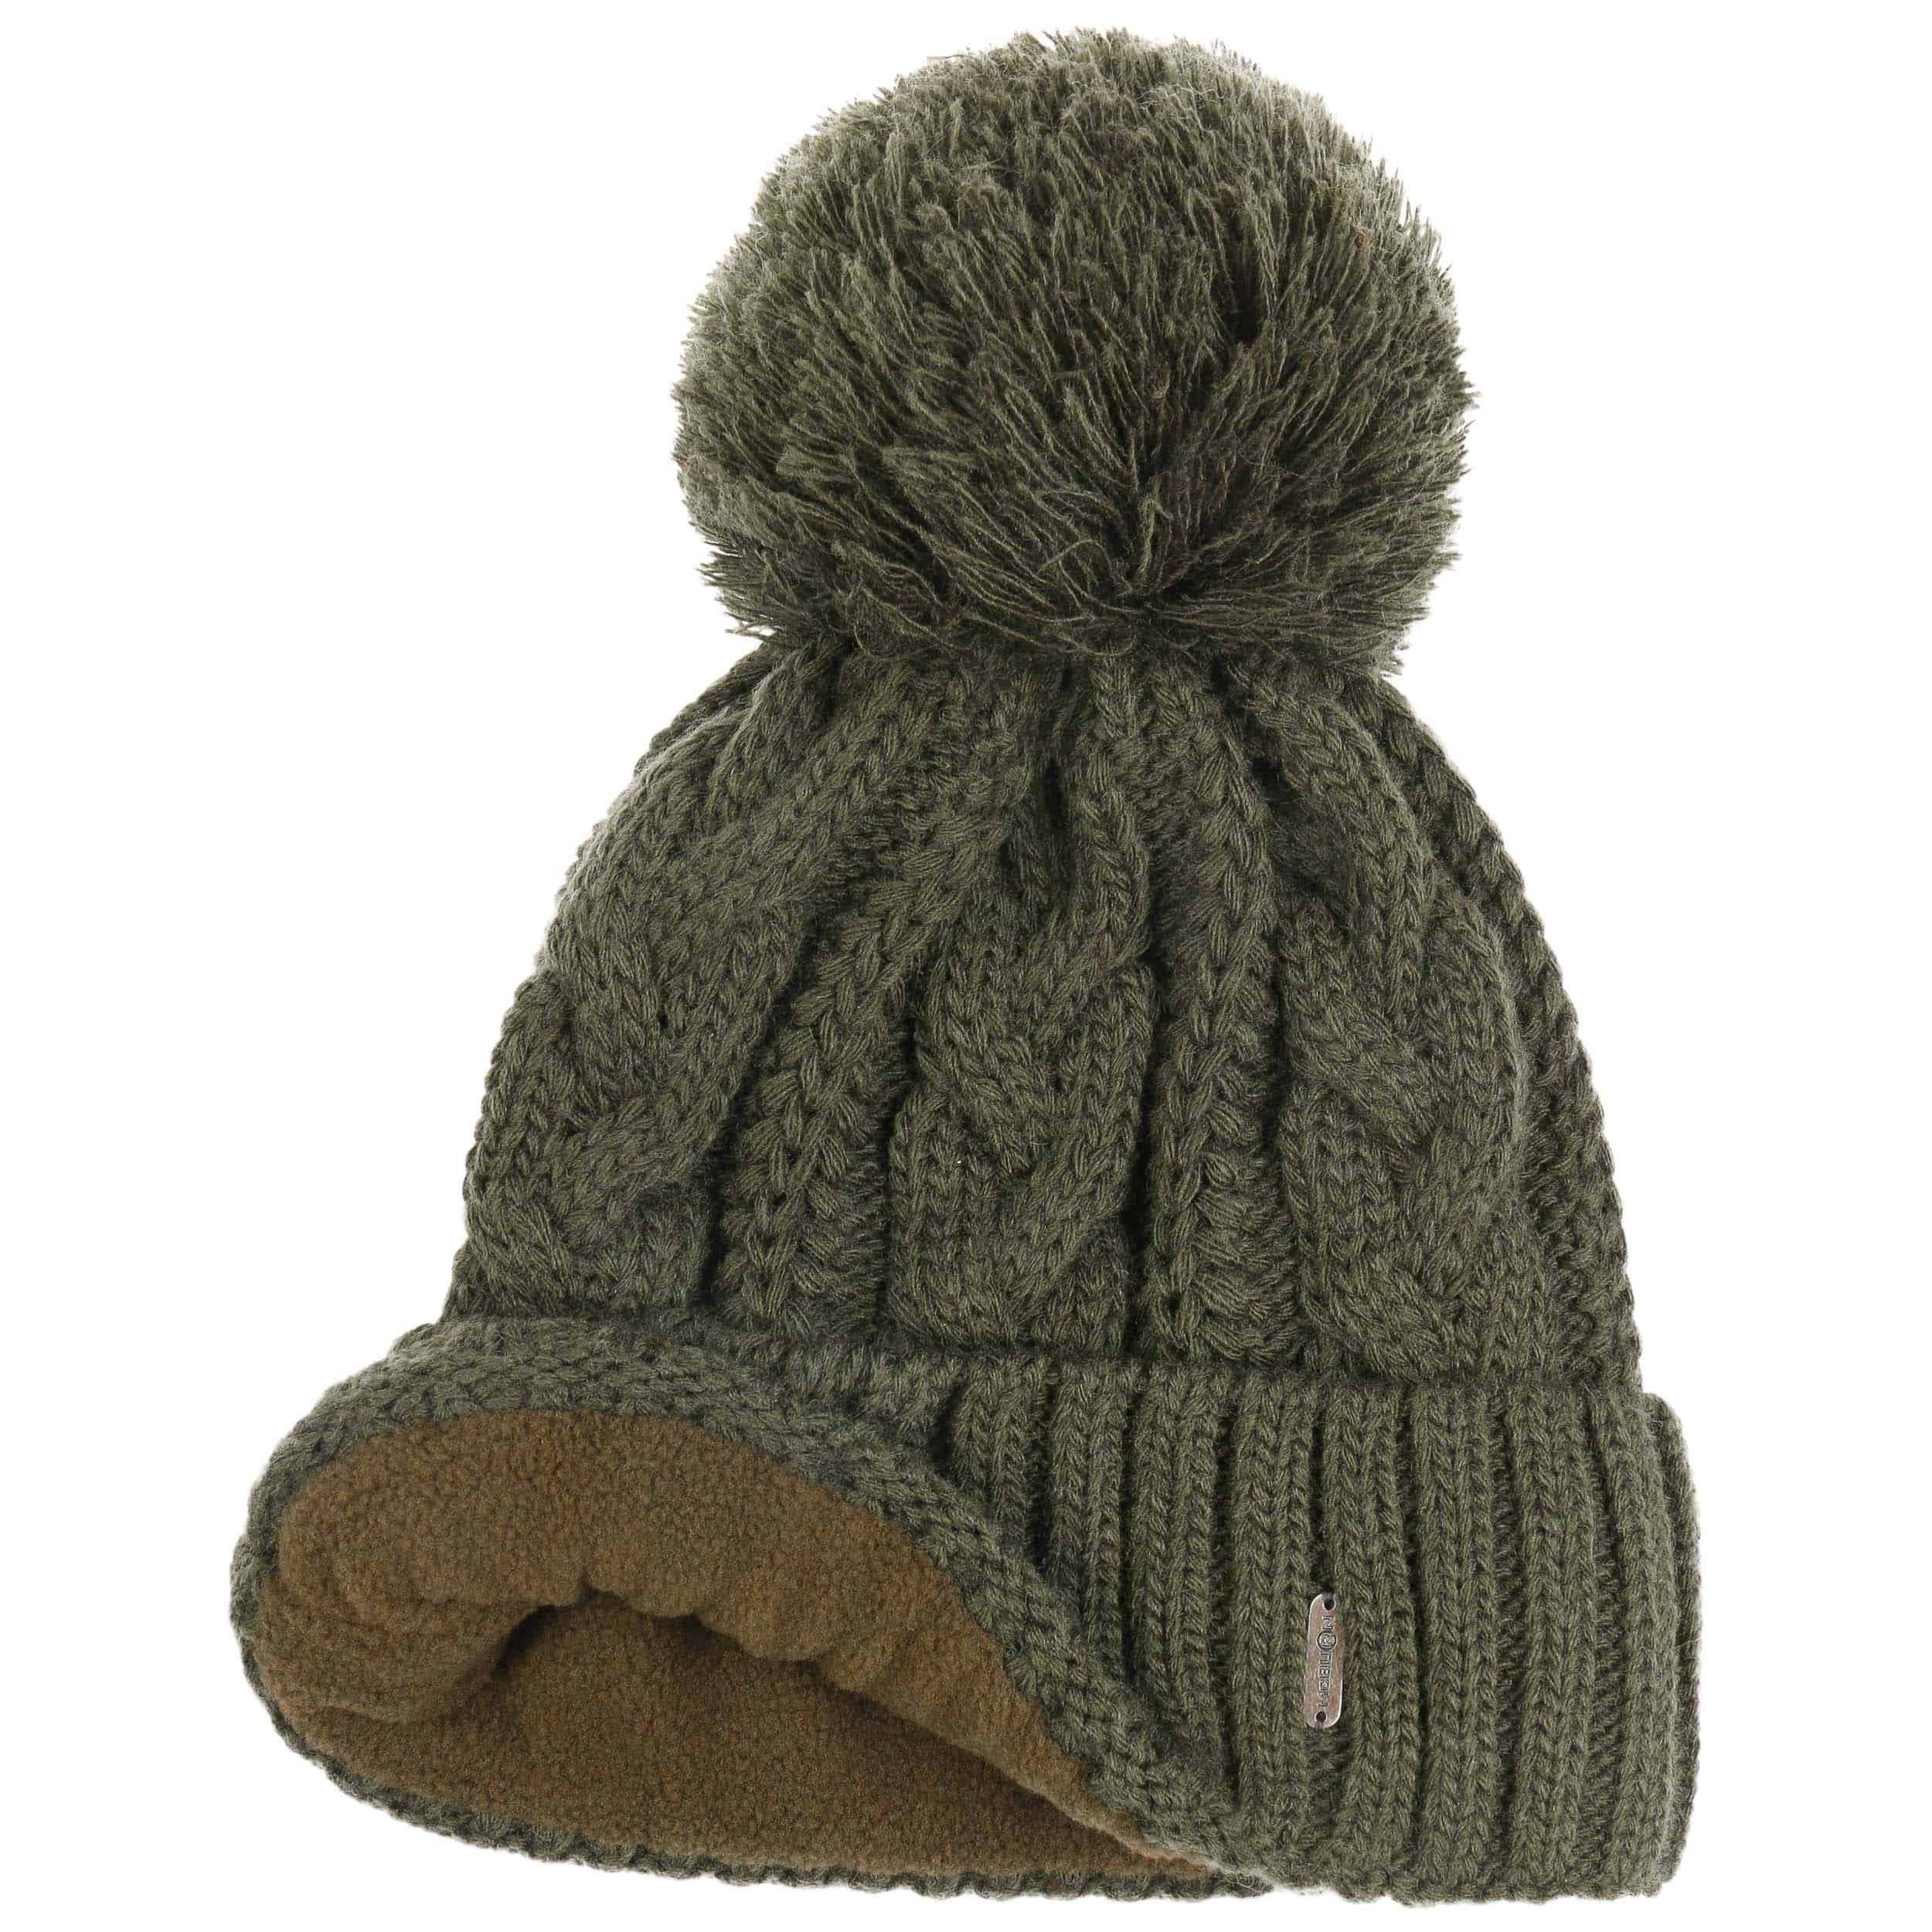 Giant Bobble Hat by McBURN - 42,95